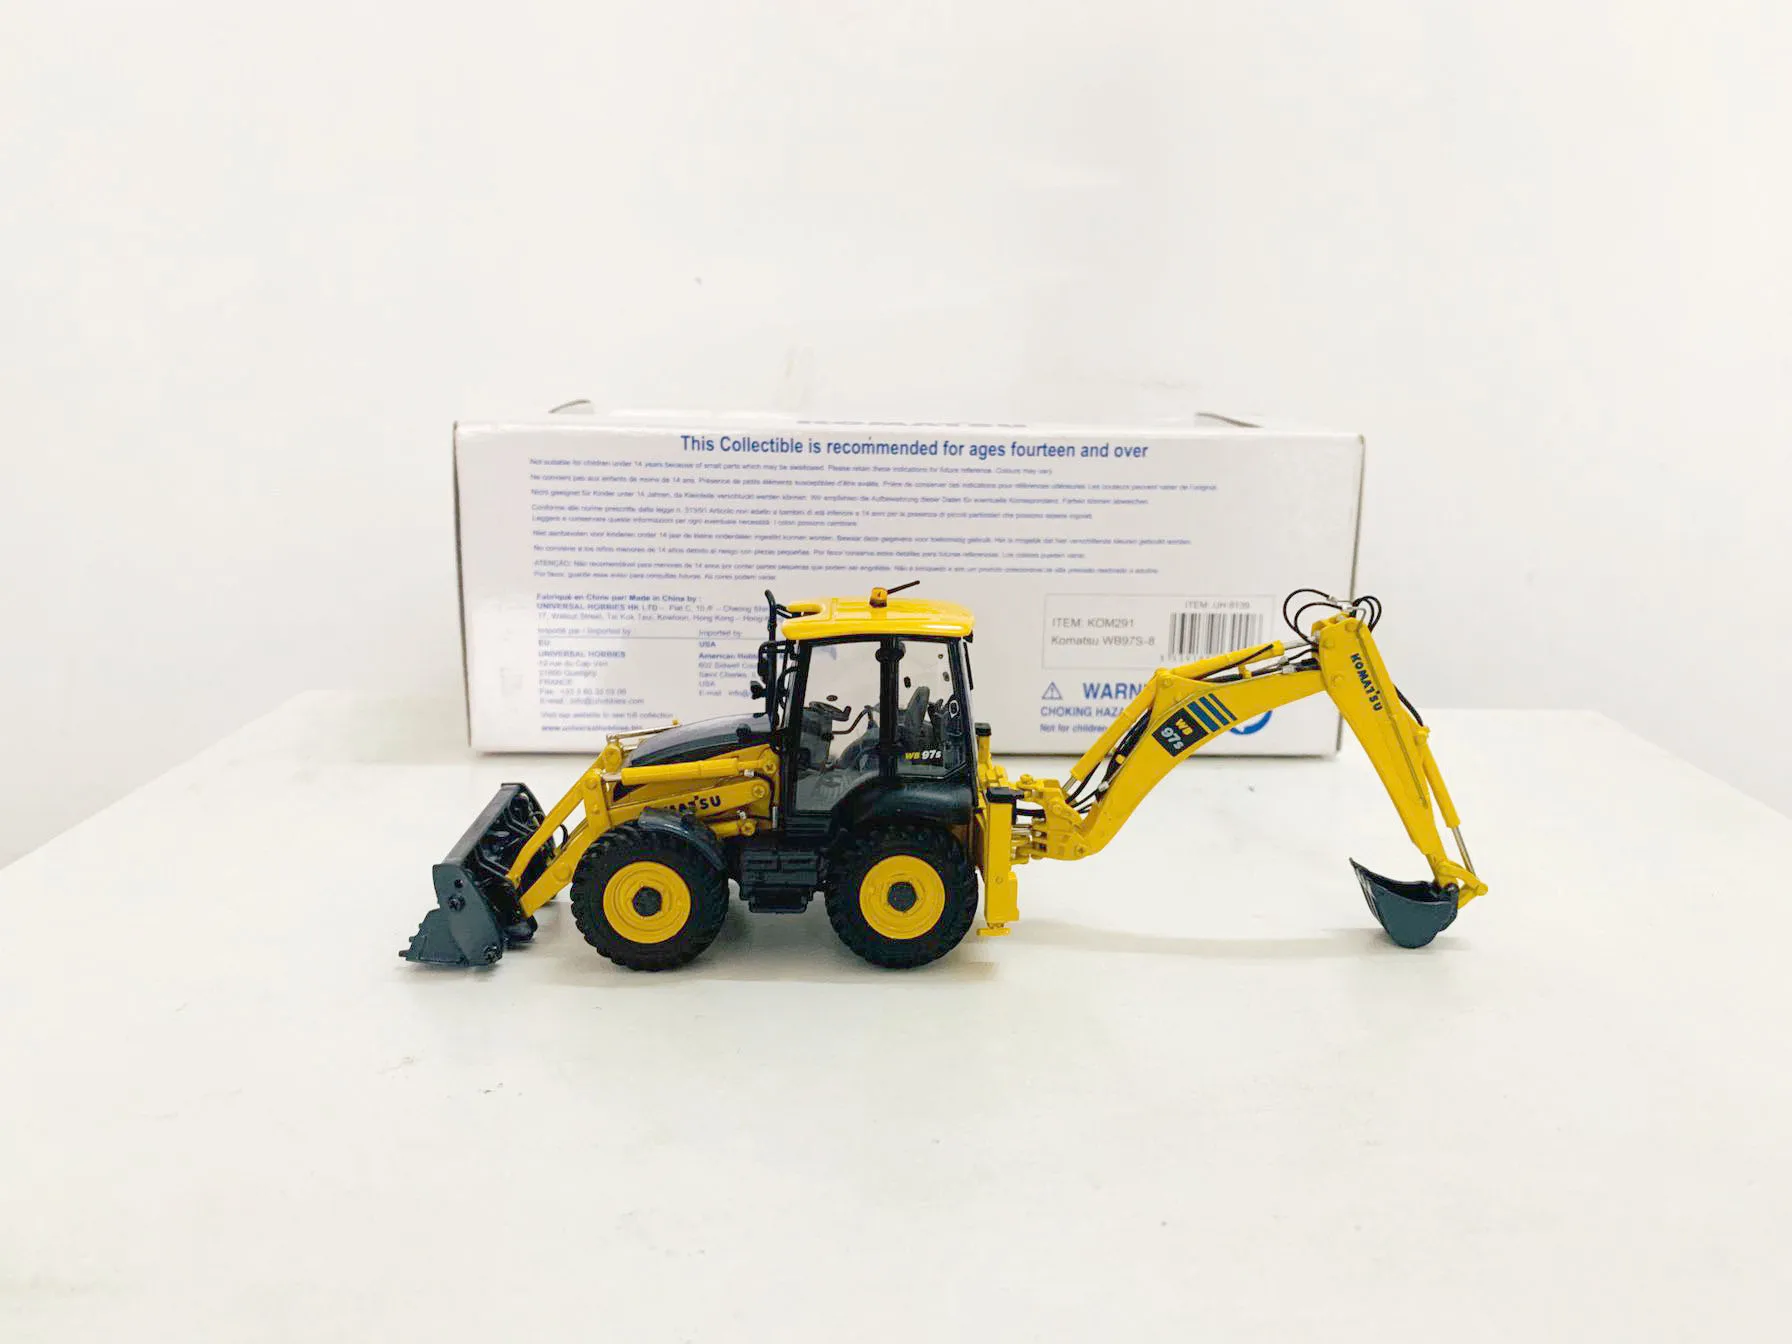 

WB97S-8 Backhoe Loader 1:50 Scale Die-Cast Collectible Model UH8139 New in Box